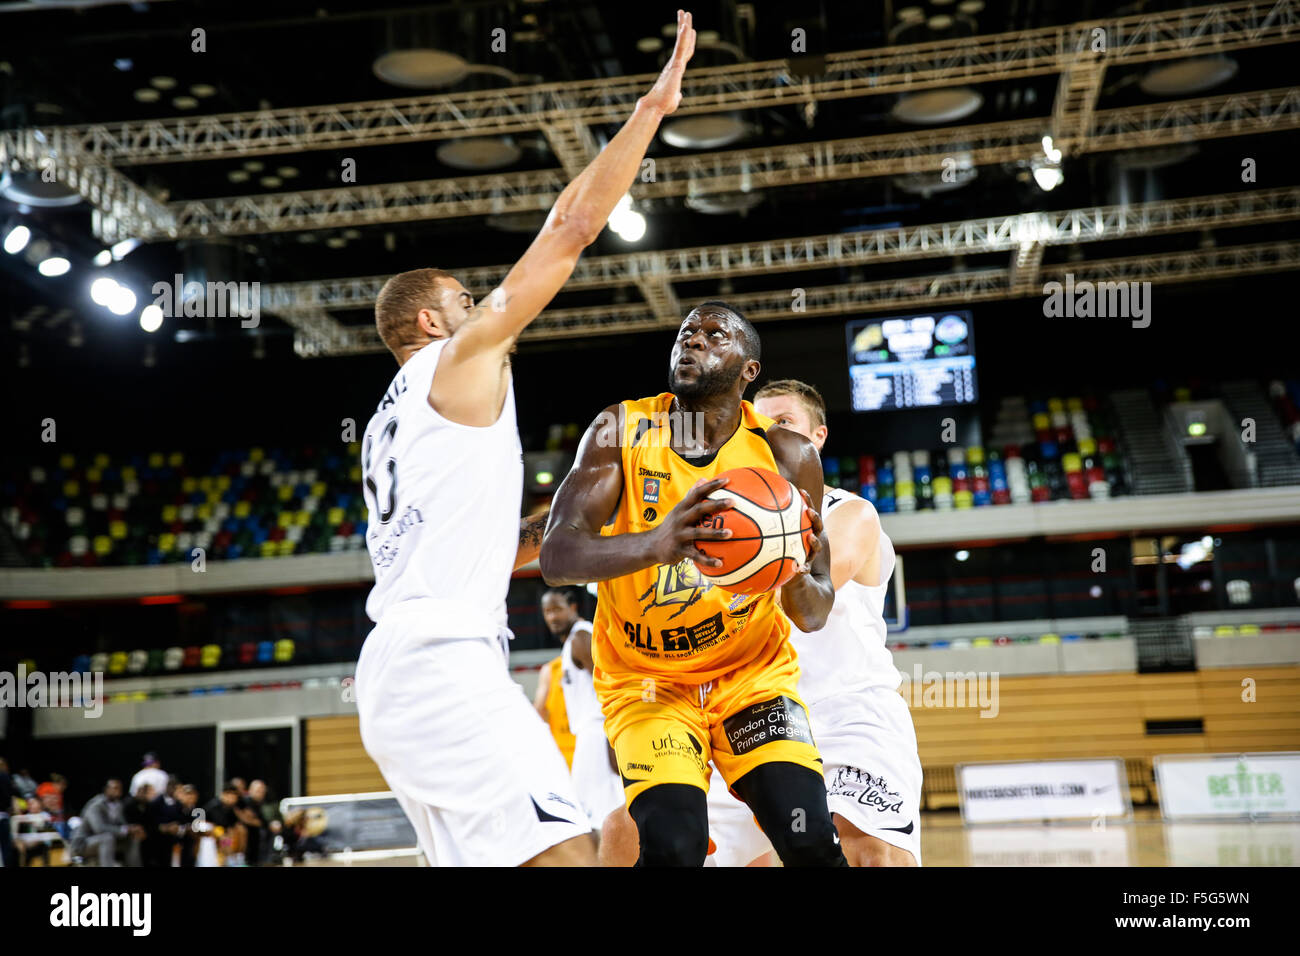 London UK. 29th October, 2015. London lions' captain .Joe Ikhinmwin with the ball.London Lions vs Manchester Giants BBL game at Stock Photo